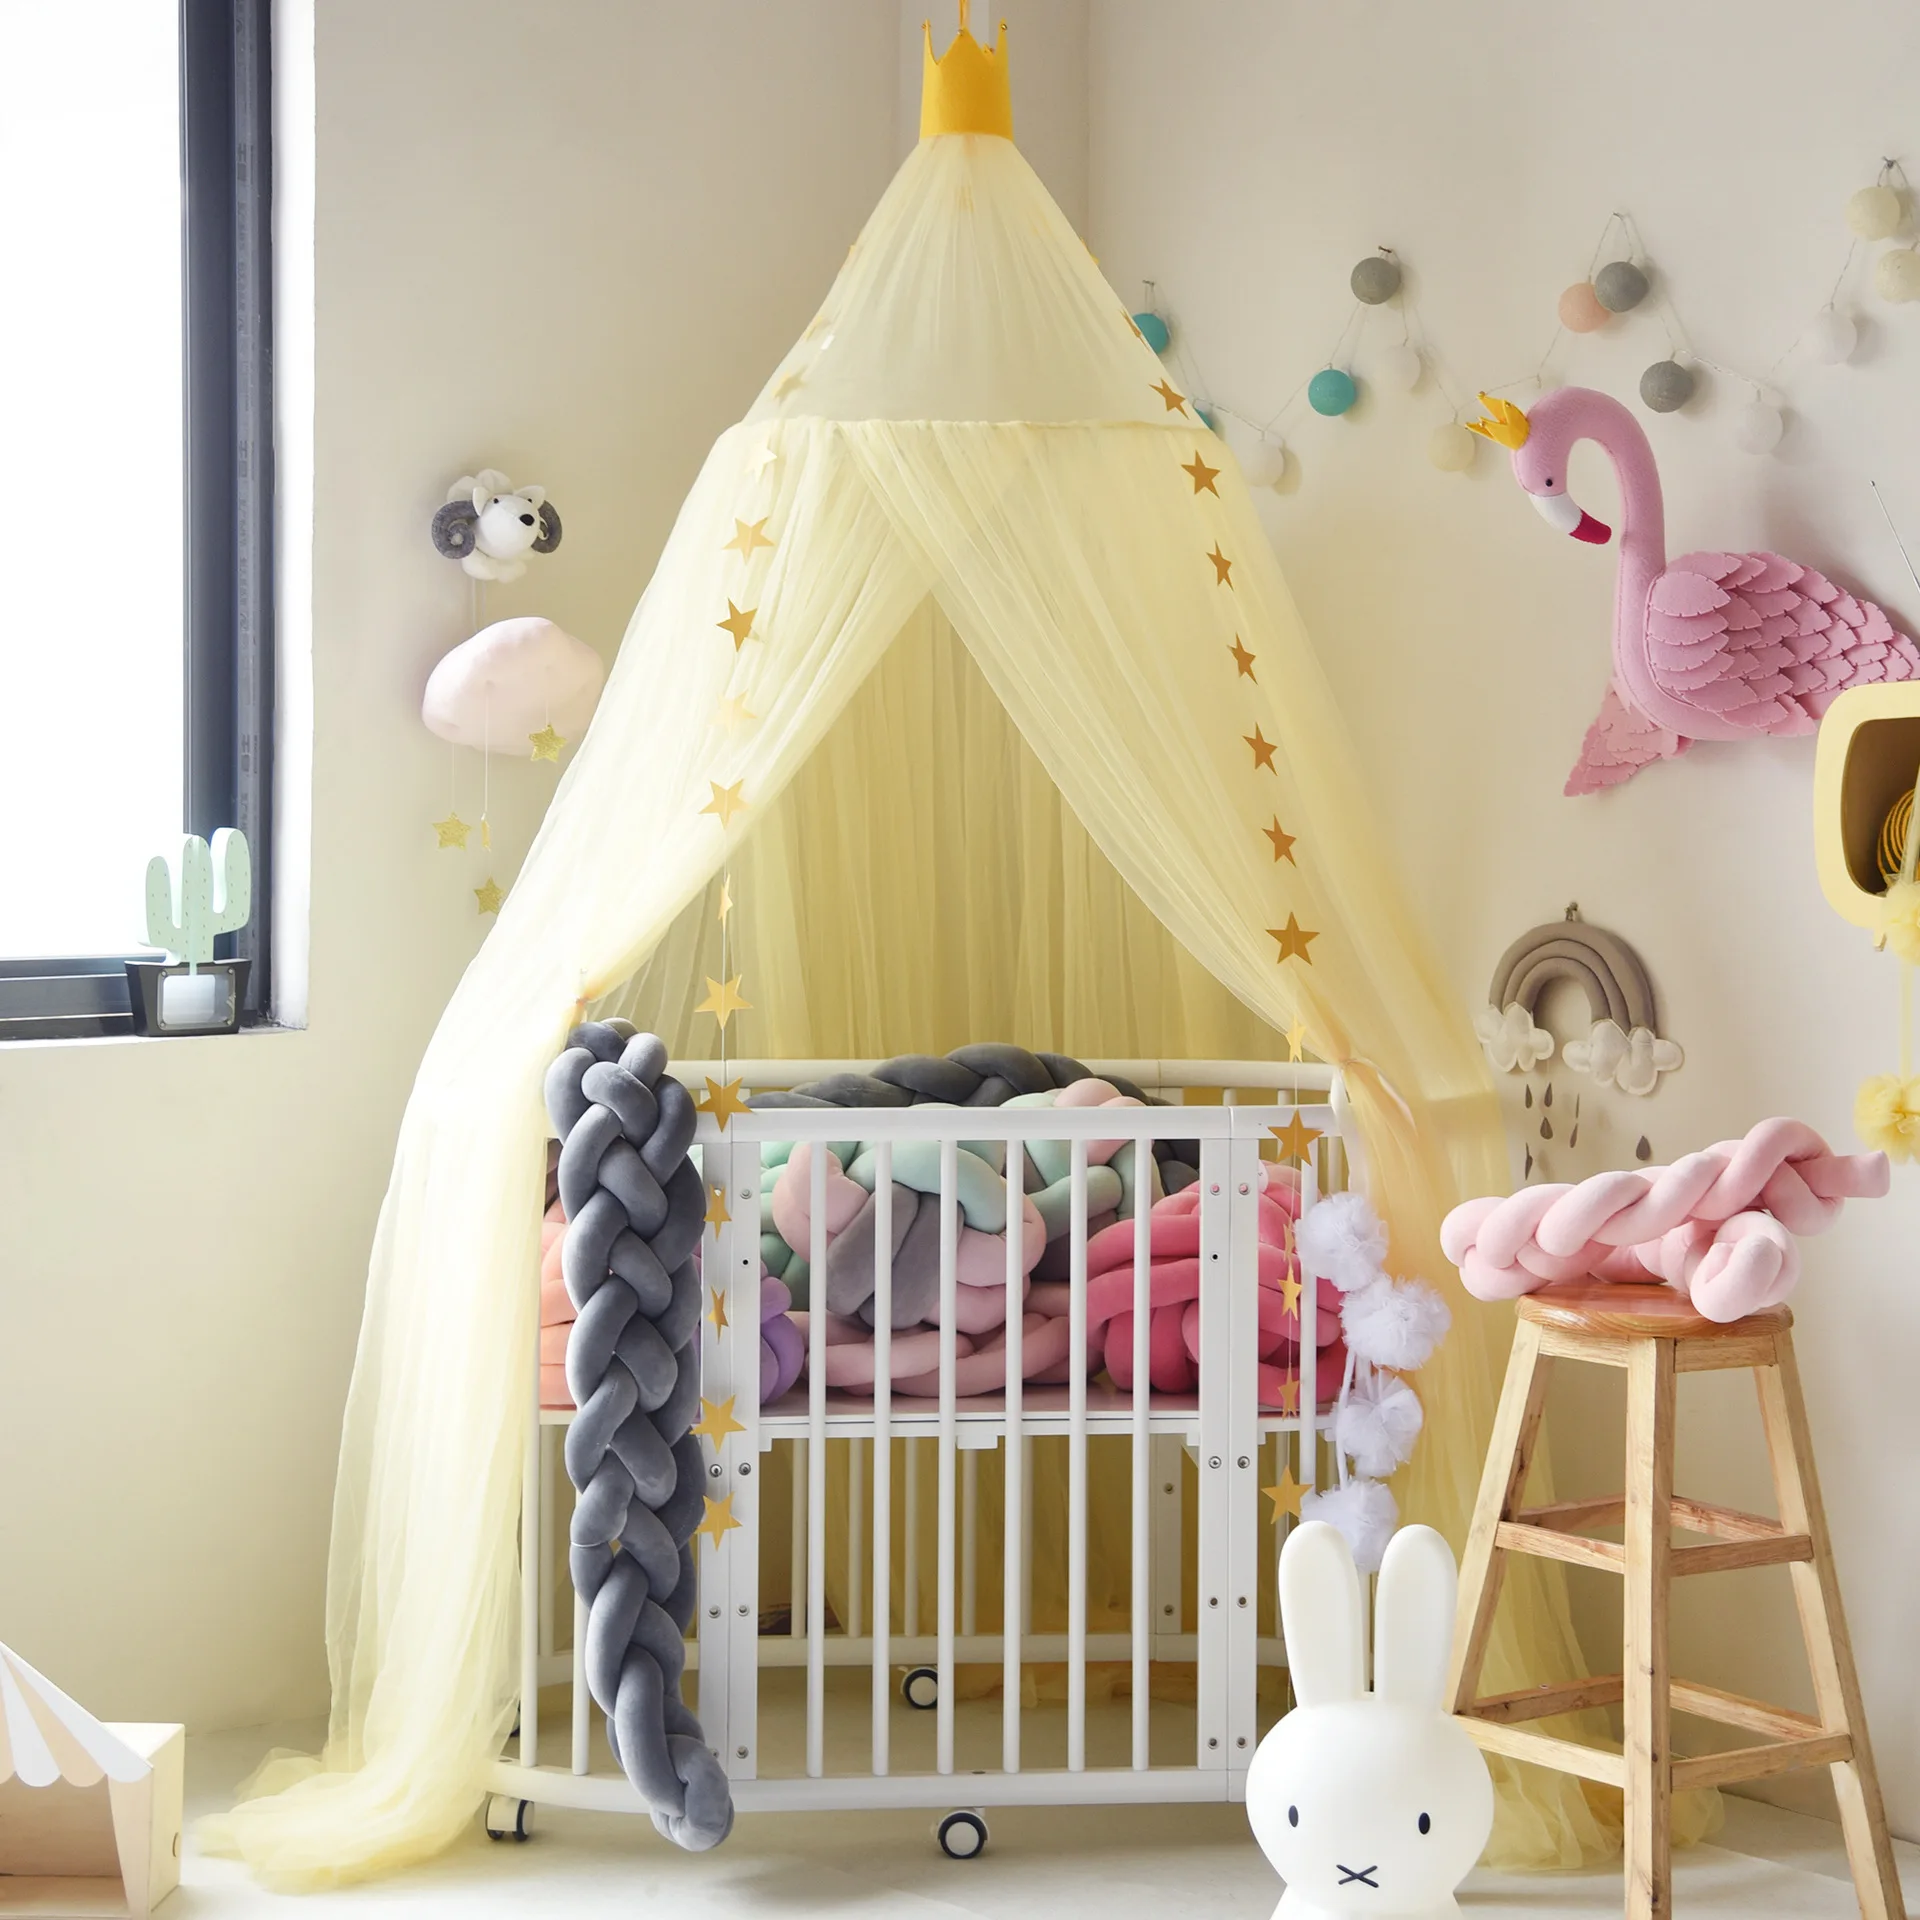 

Summer Children Kid Bedding Mosquito Net Romantic Baby Girl Round Bed Mosquito Net Bed Cover Bed Canopy For Kid Nursery CA